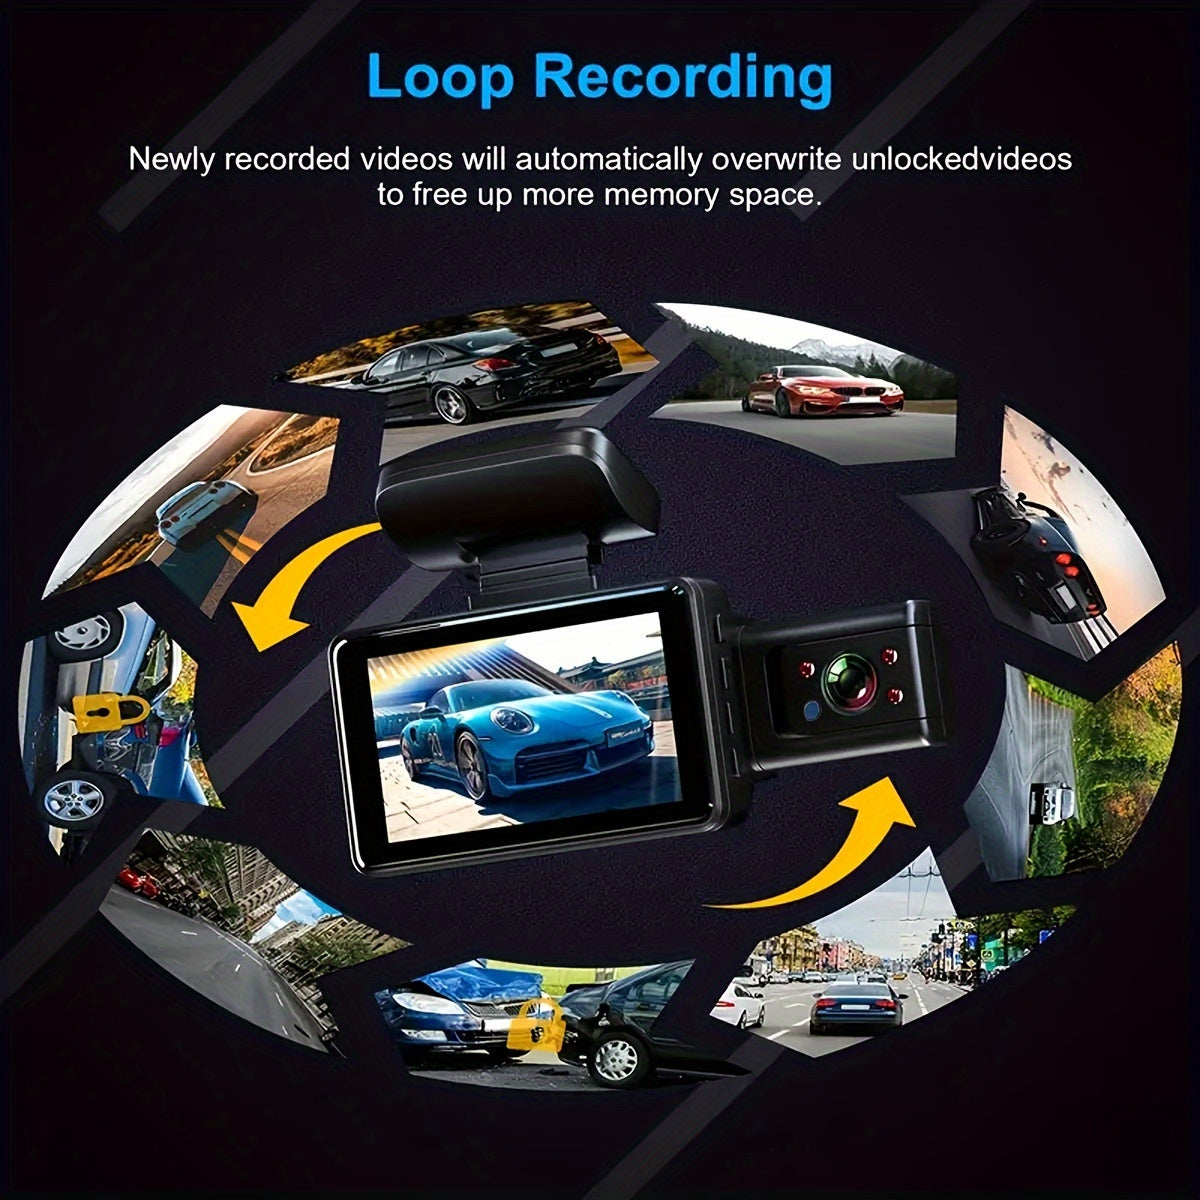 3 Inch Dual Lens Dash Cam For Cars, Front And Inside, Car Camera With Loop Recording, Night Vision, Wide Angle Car DVR Camera Car Video Recorder Vehicle Black Box